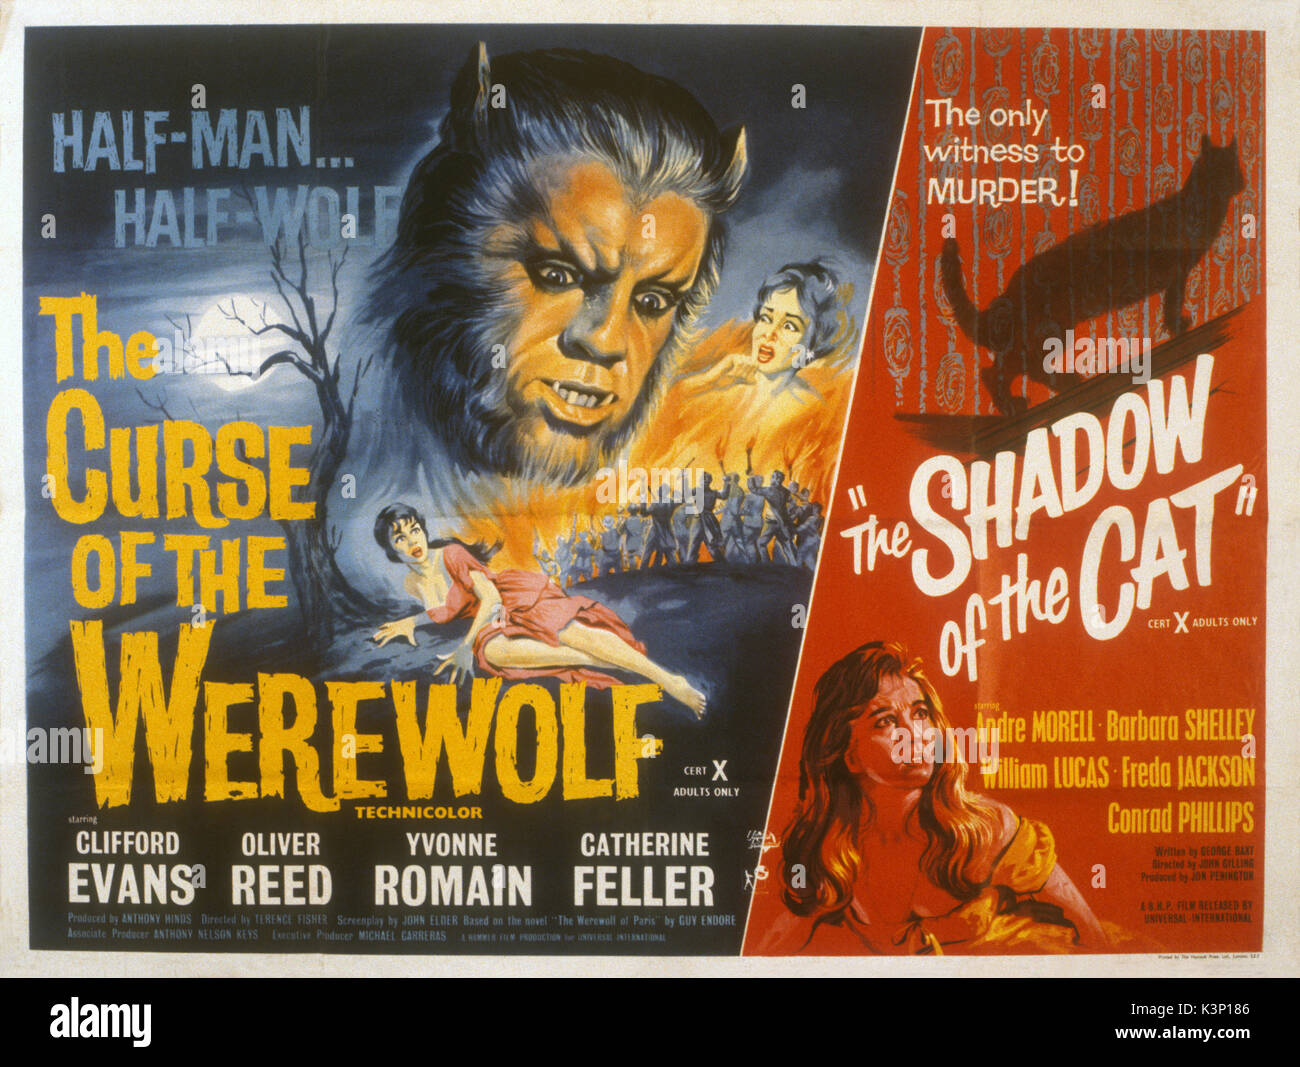 THE CURSE OF THE WEREWOLF [BR 1961] SHADOW OF THE CAT [BR 1961] Double bill poster     Date: 1961 Stock Photo